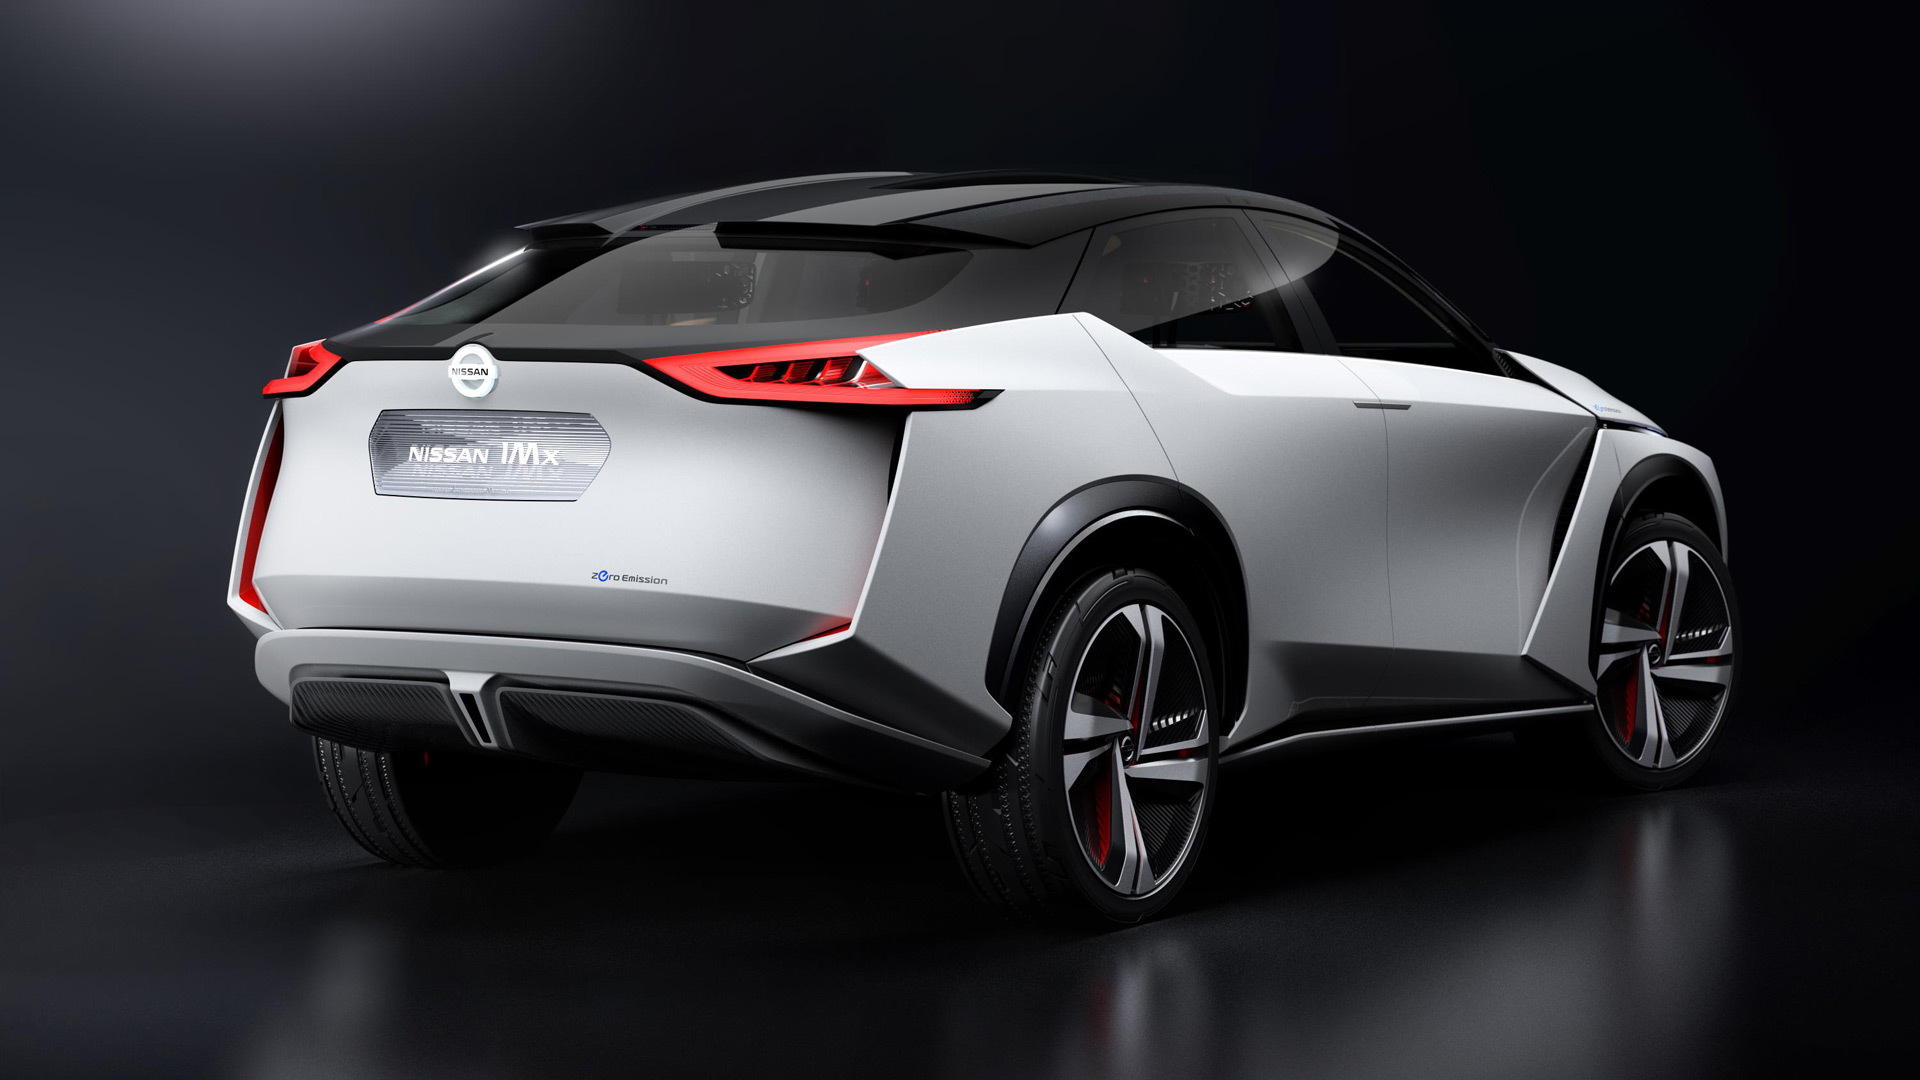 Nissan IMx is a selfdriving electric SUV concept